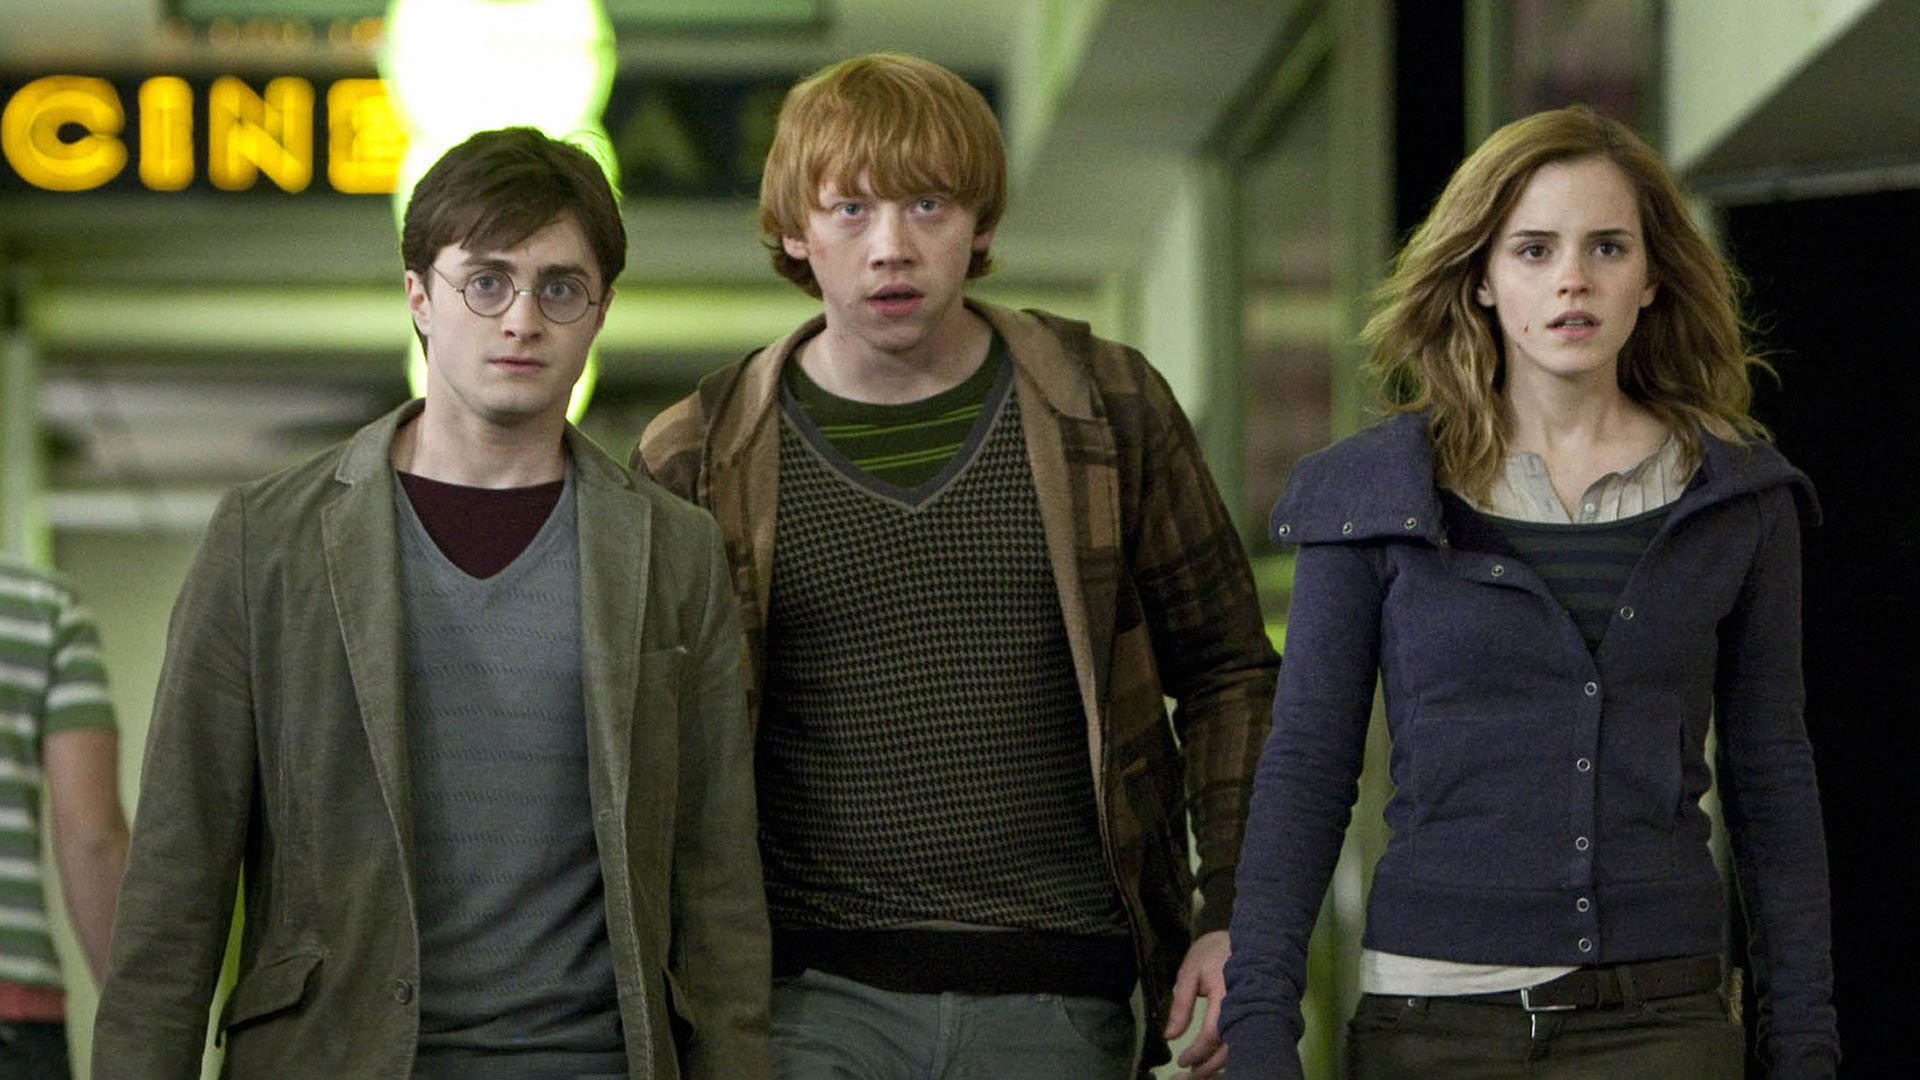 4 Wild Theories Will Make You See Harry Potter in a Whole New Way